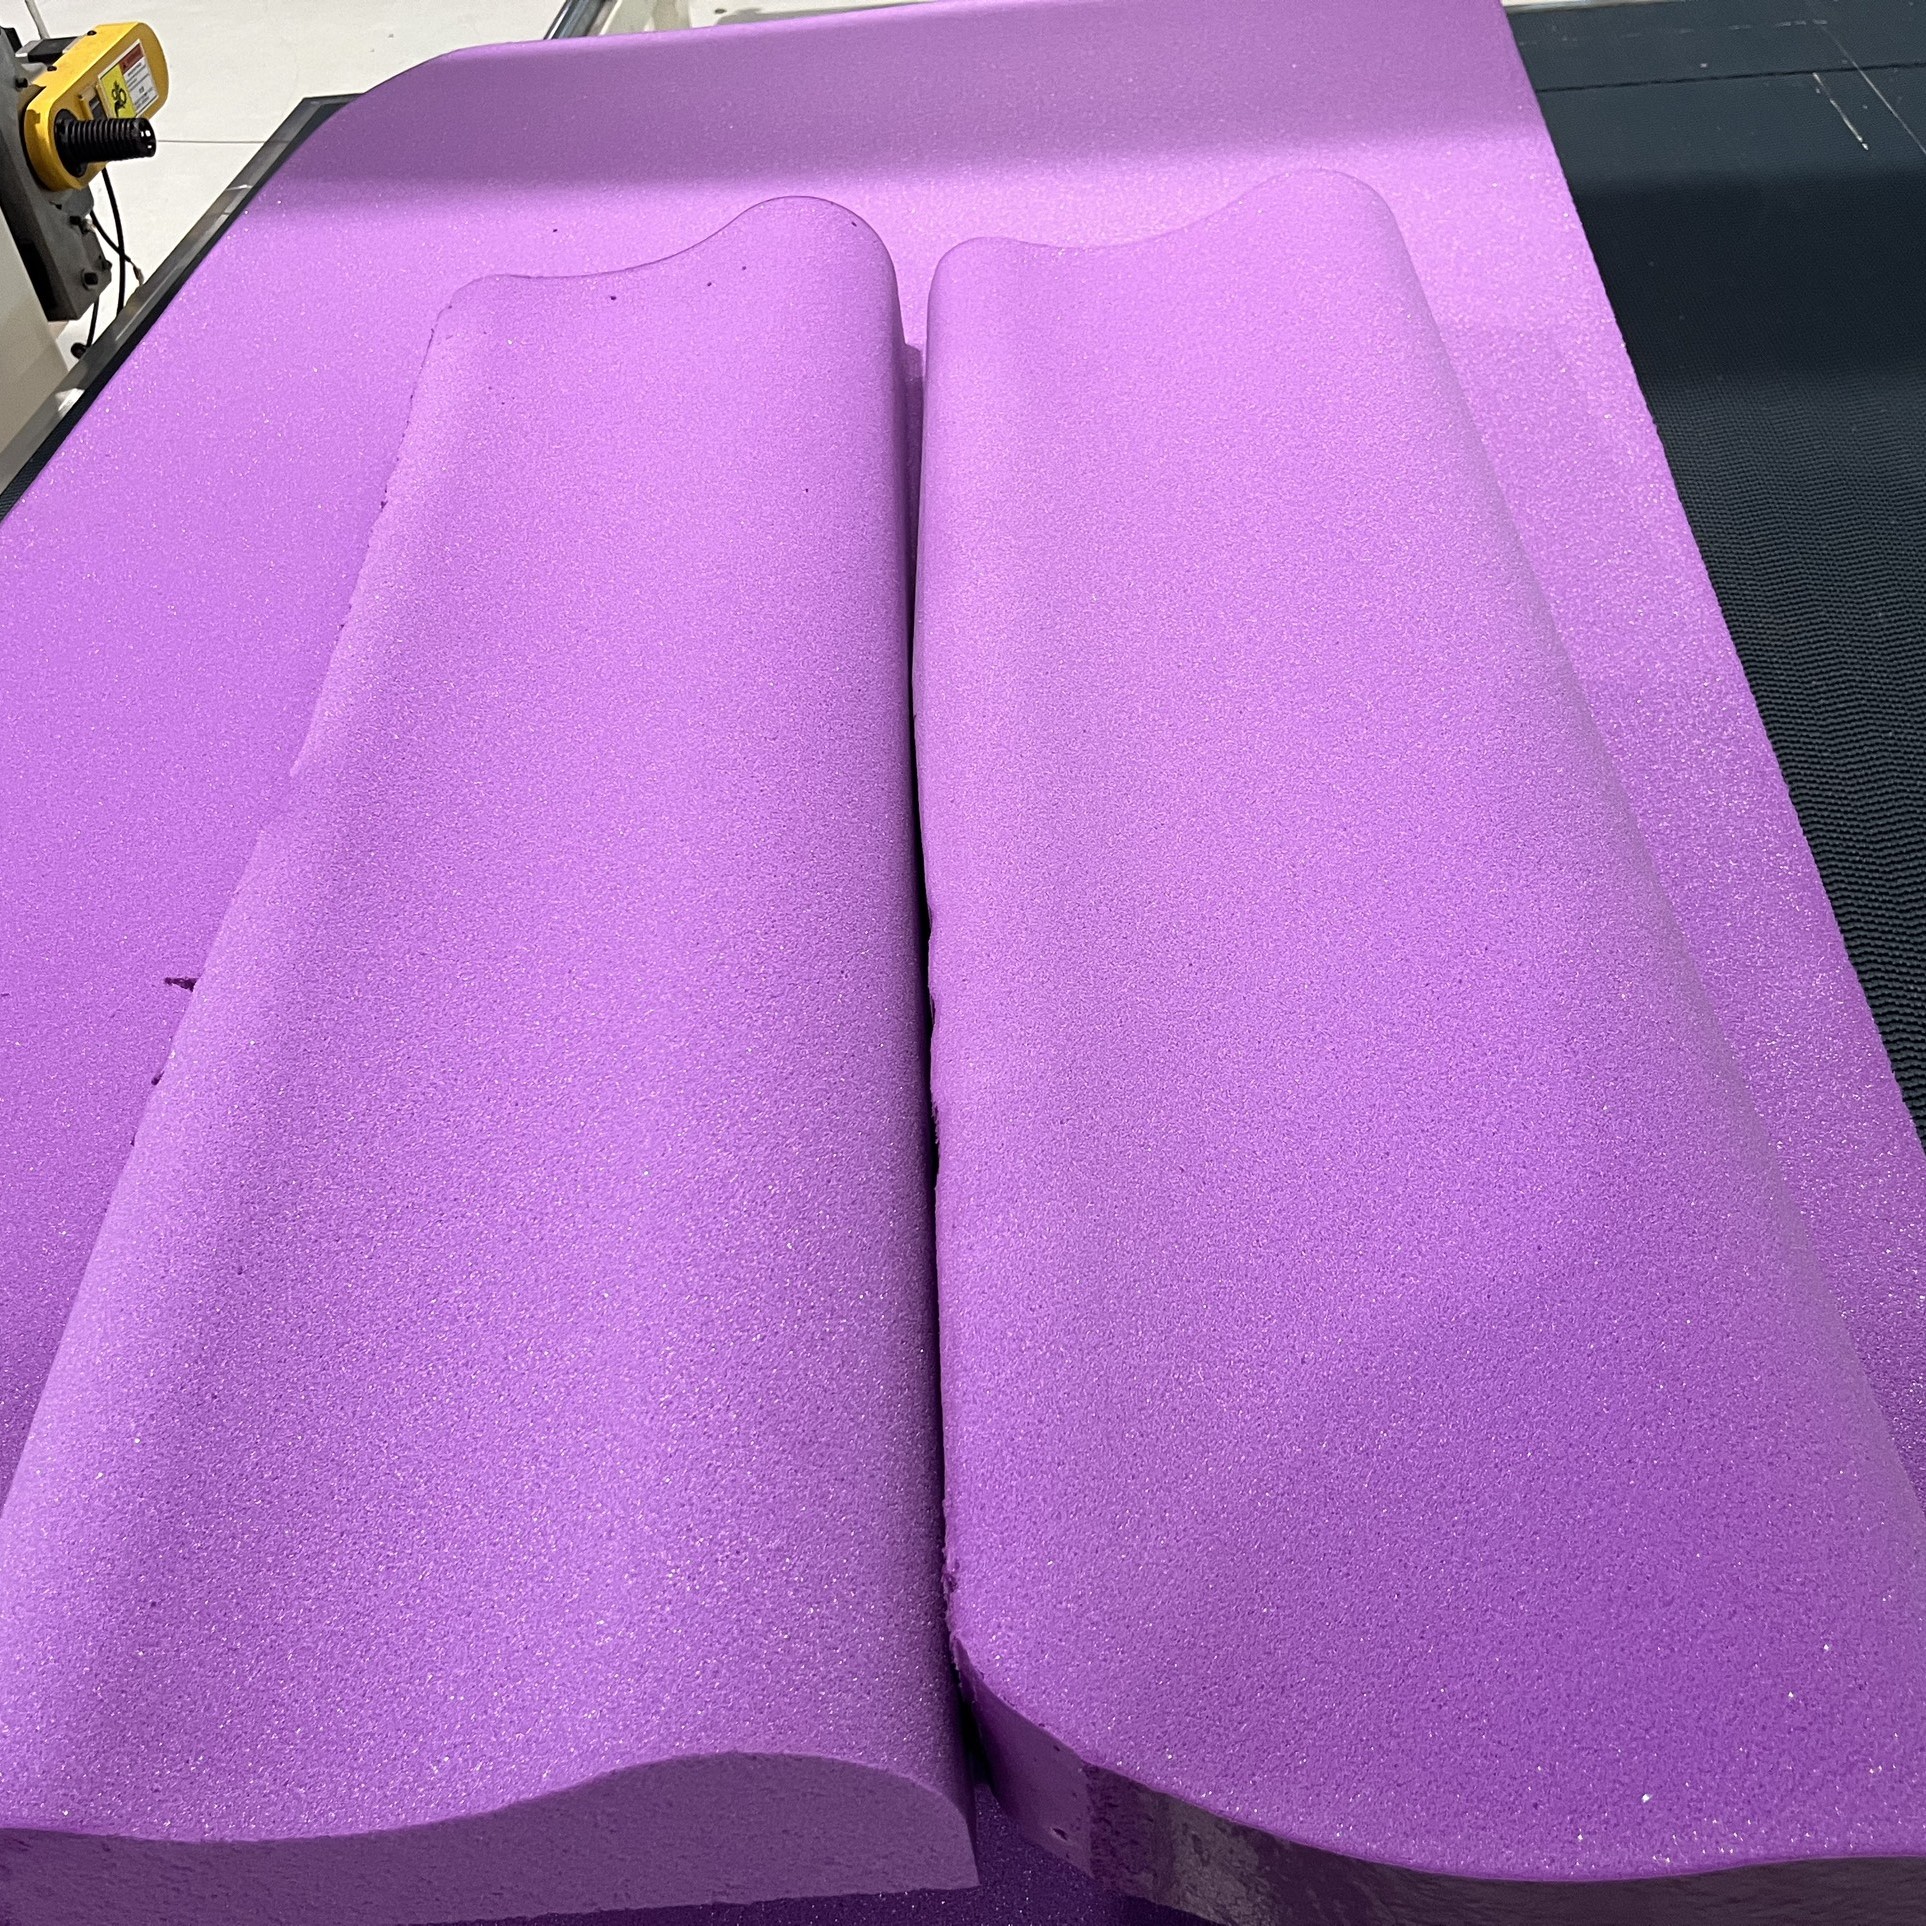 Polyurethane Foam Furniture Fast Delivery Non-Toxic Packaging Industry Resistant Shock Proof Pallets from Vietnam Manufacturer 8